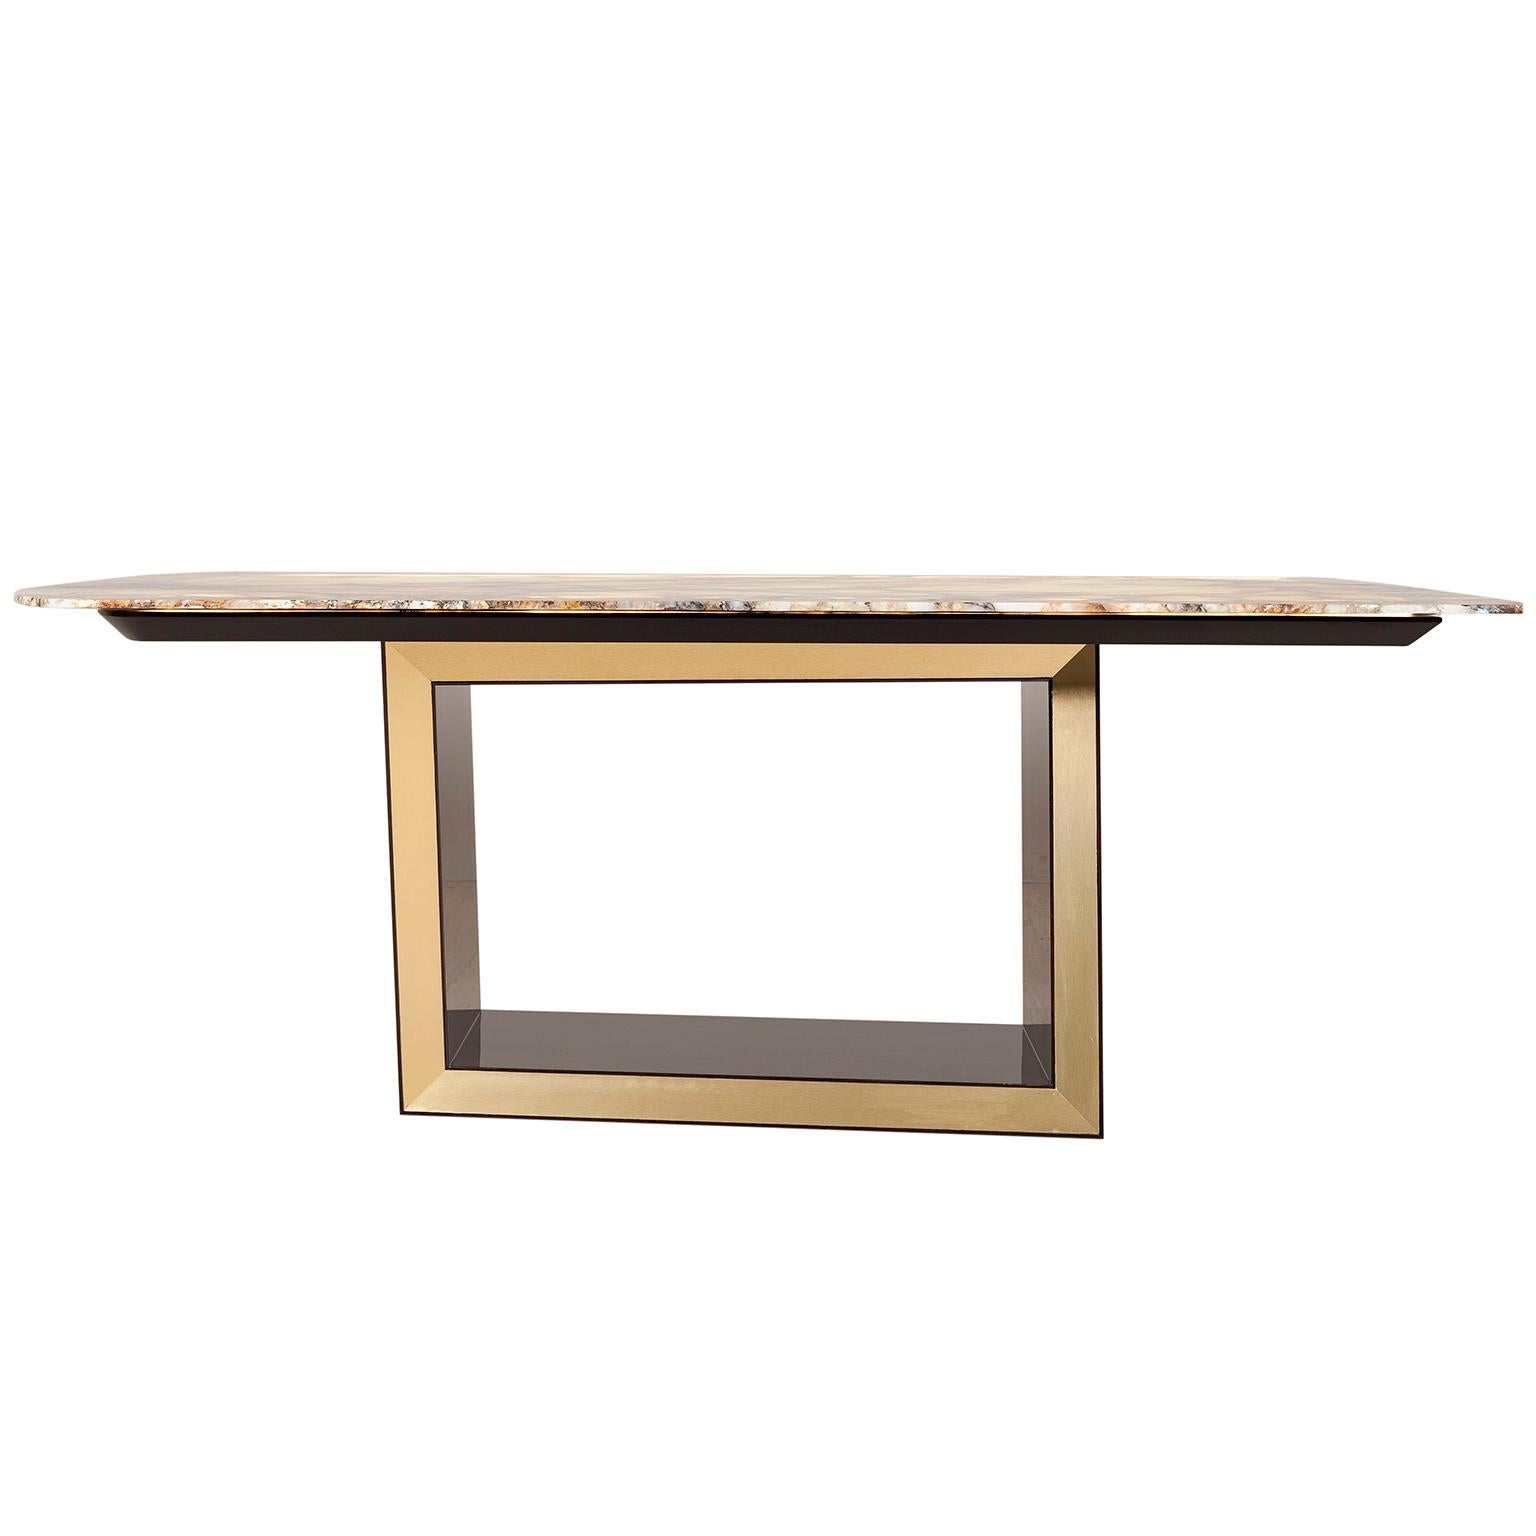 Olisippo dining table, Modern Collection, Handcrafted in Portugal - Europe by GF Modern.

Reminiscent of Lisbon's ancient history, this table is also distinguished by its architecture, where stone takes centre stage. 

The magnificent Patagonia